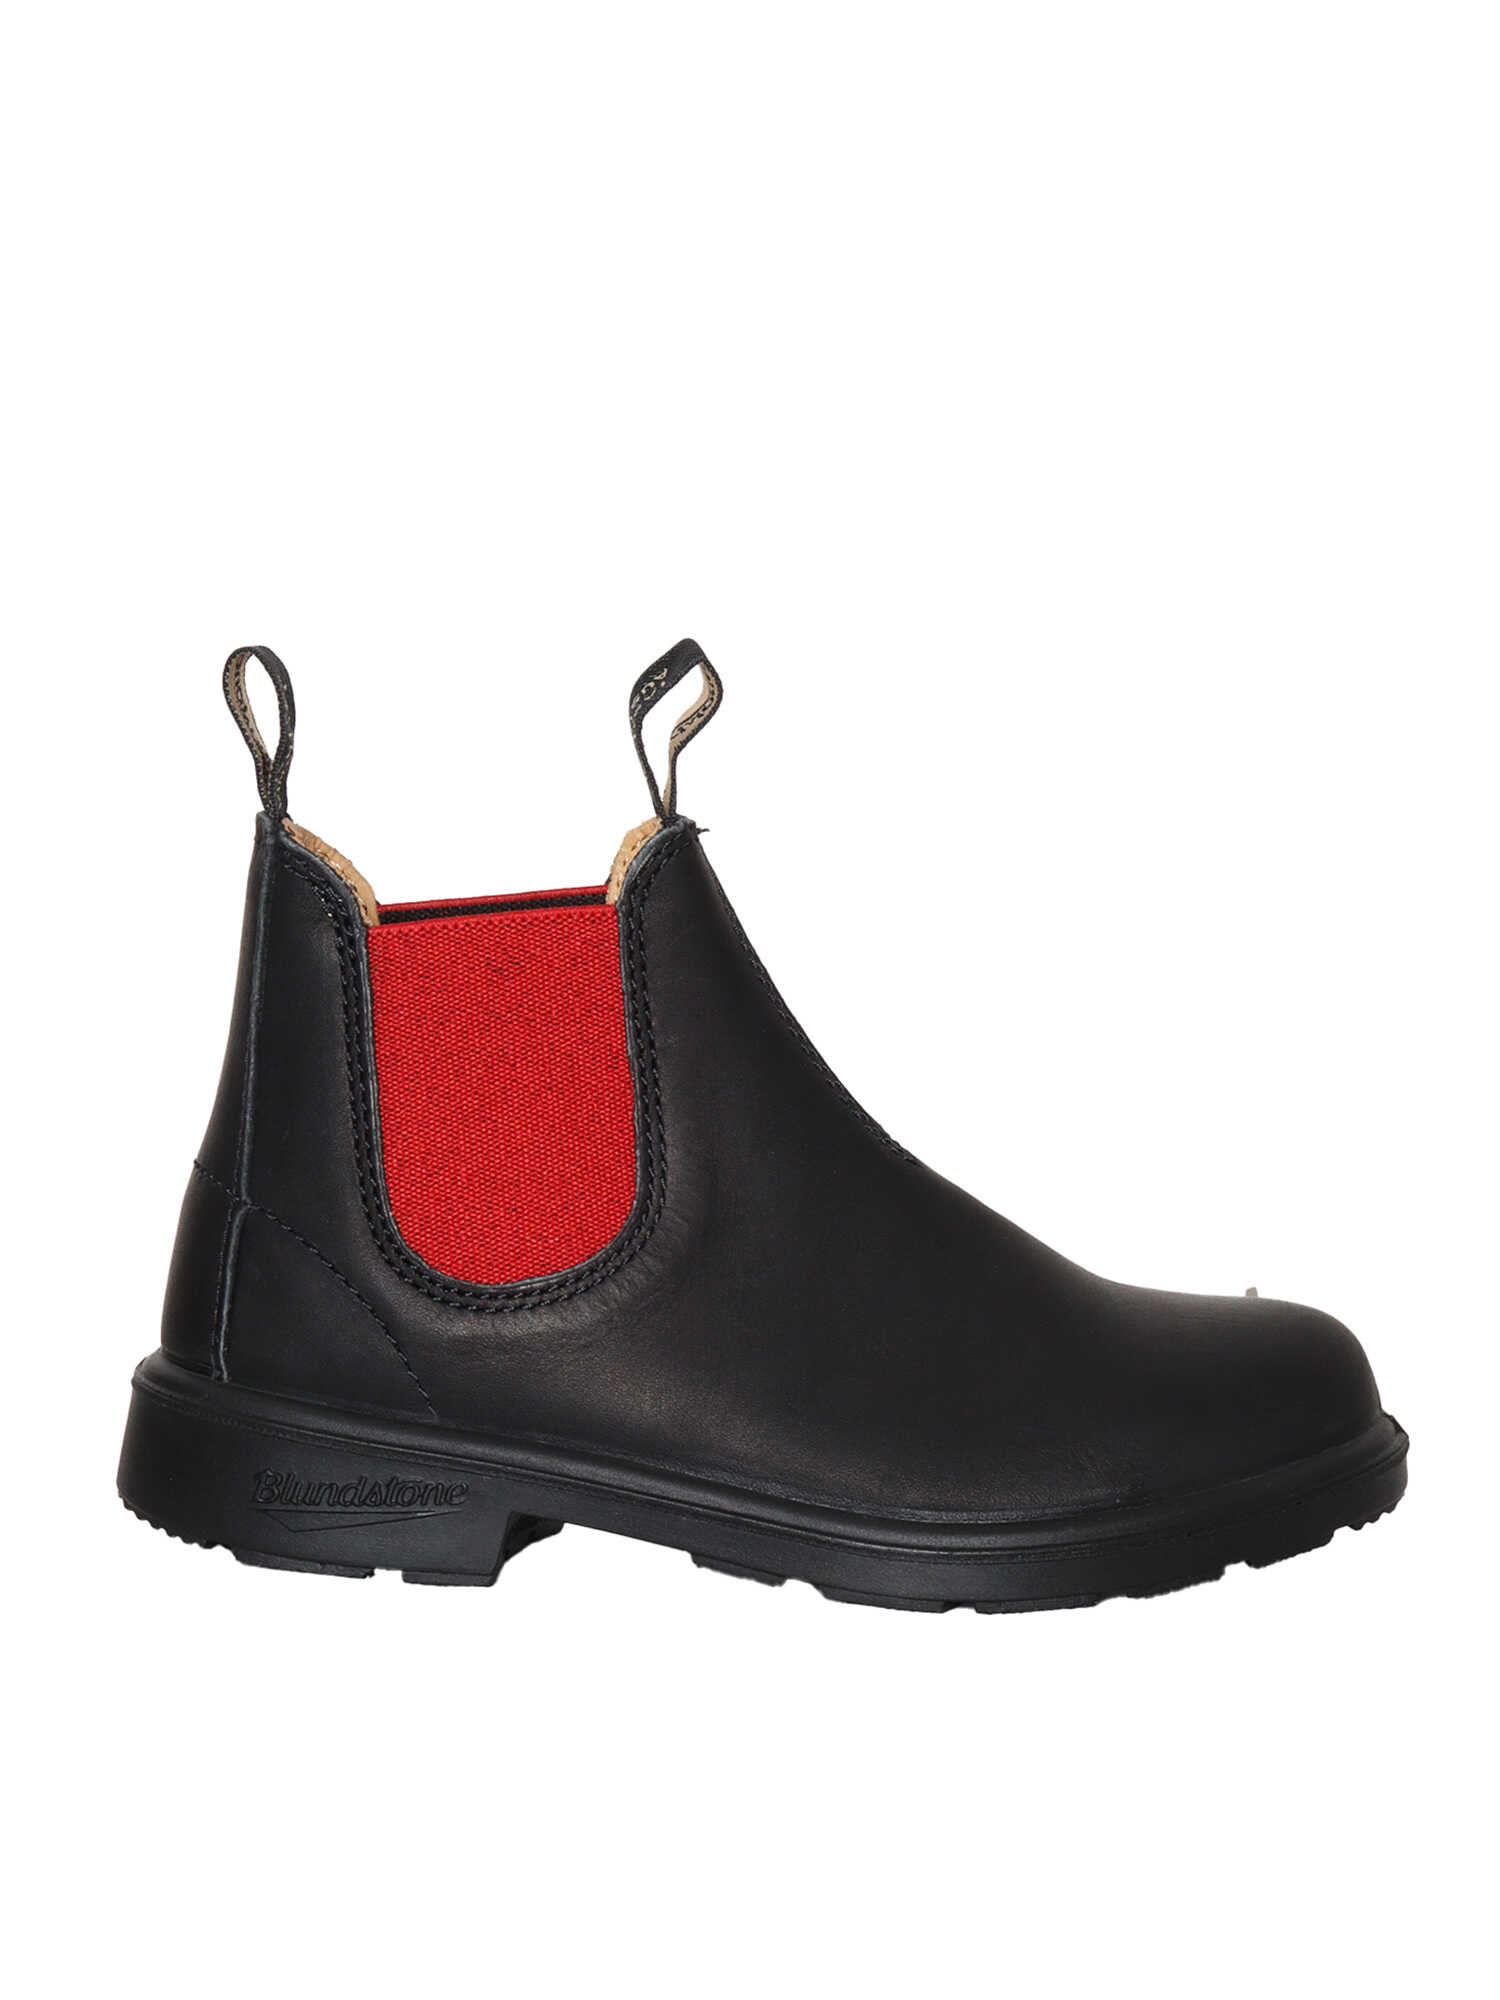 Blundstone 581 ankle boots Black